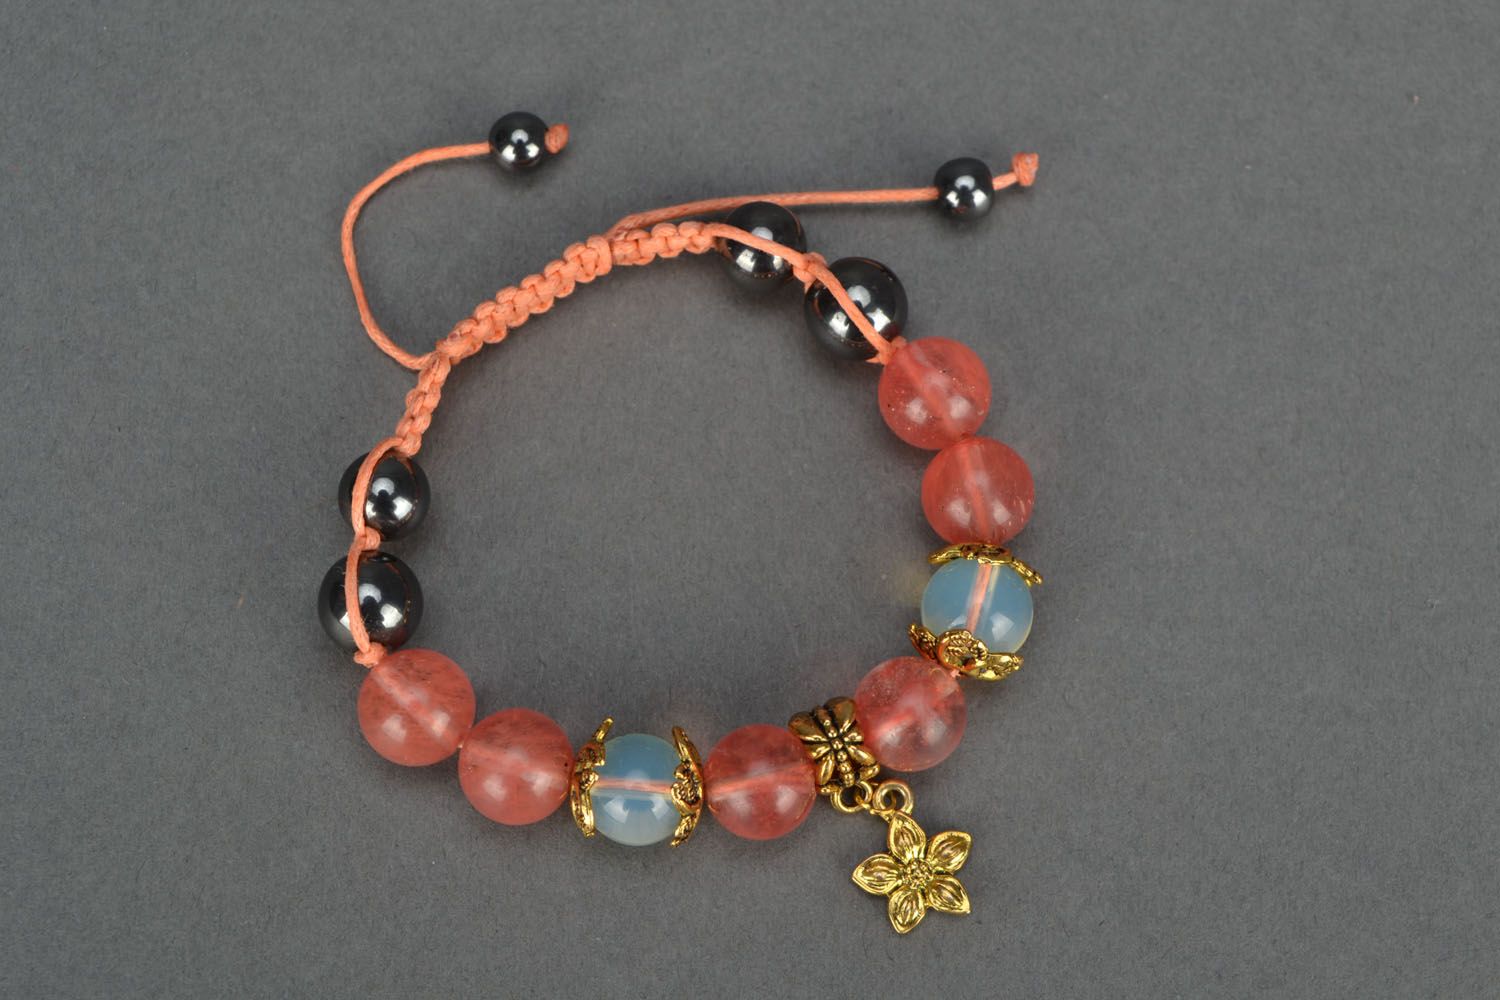 Handmade bracelet with beads and charms photo 2